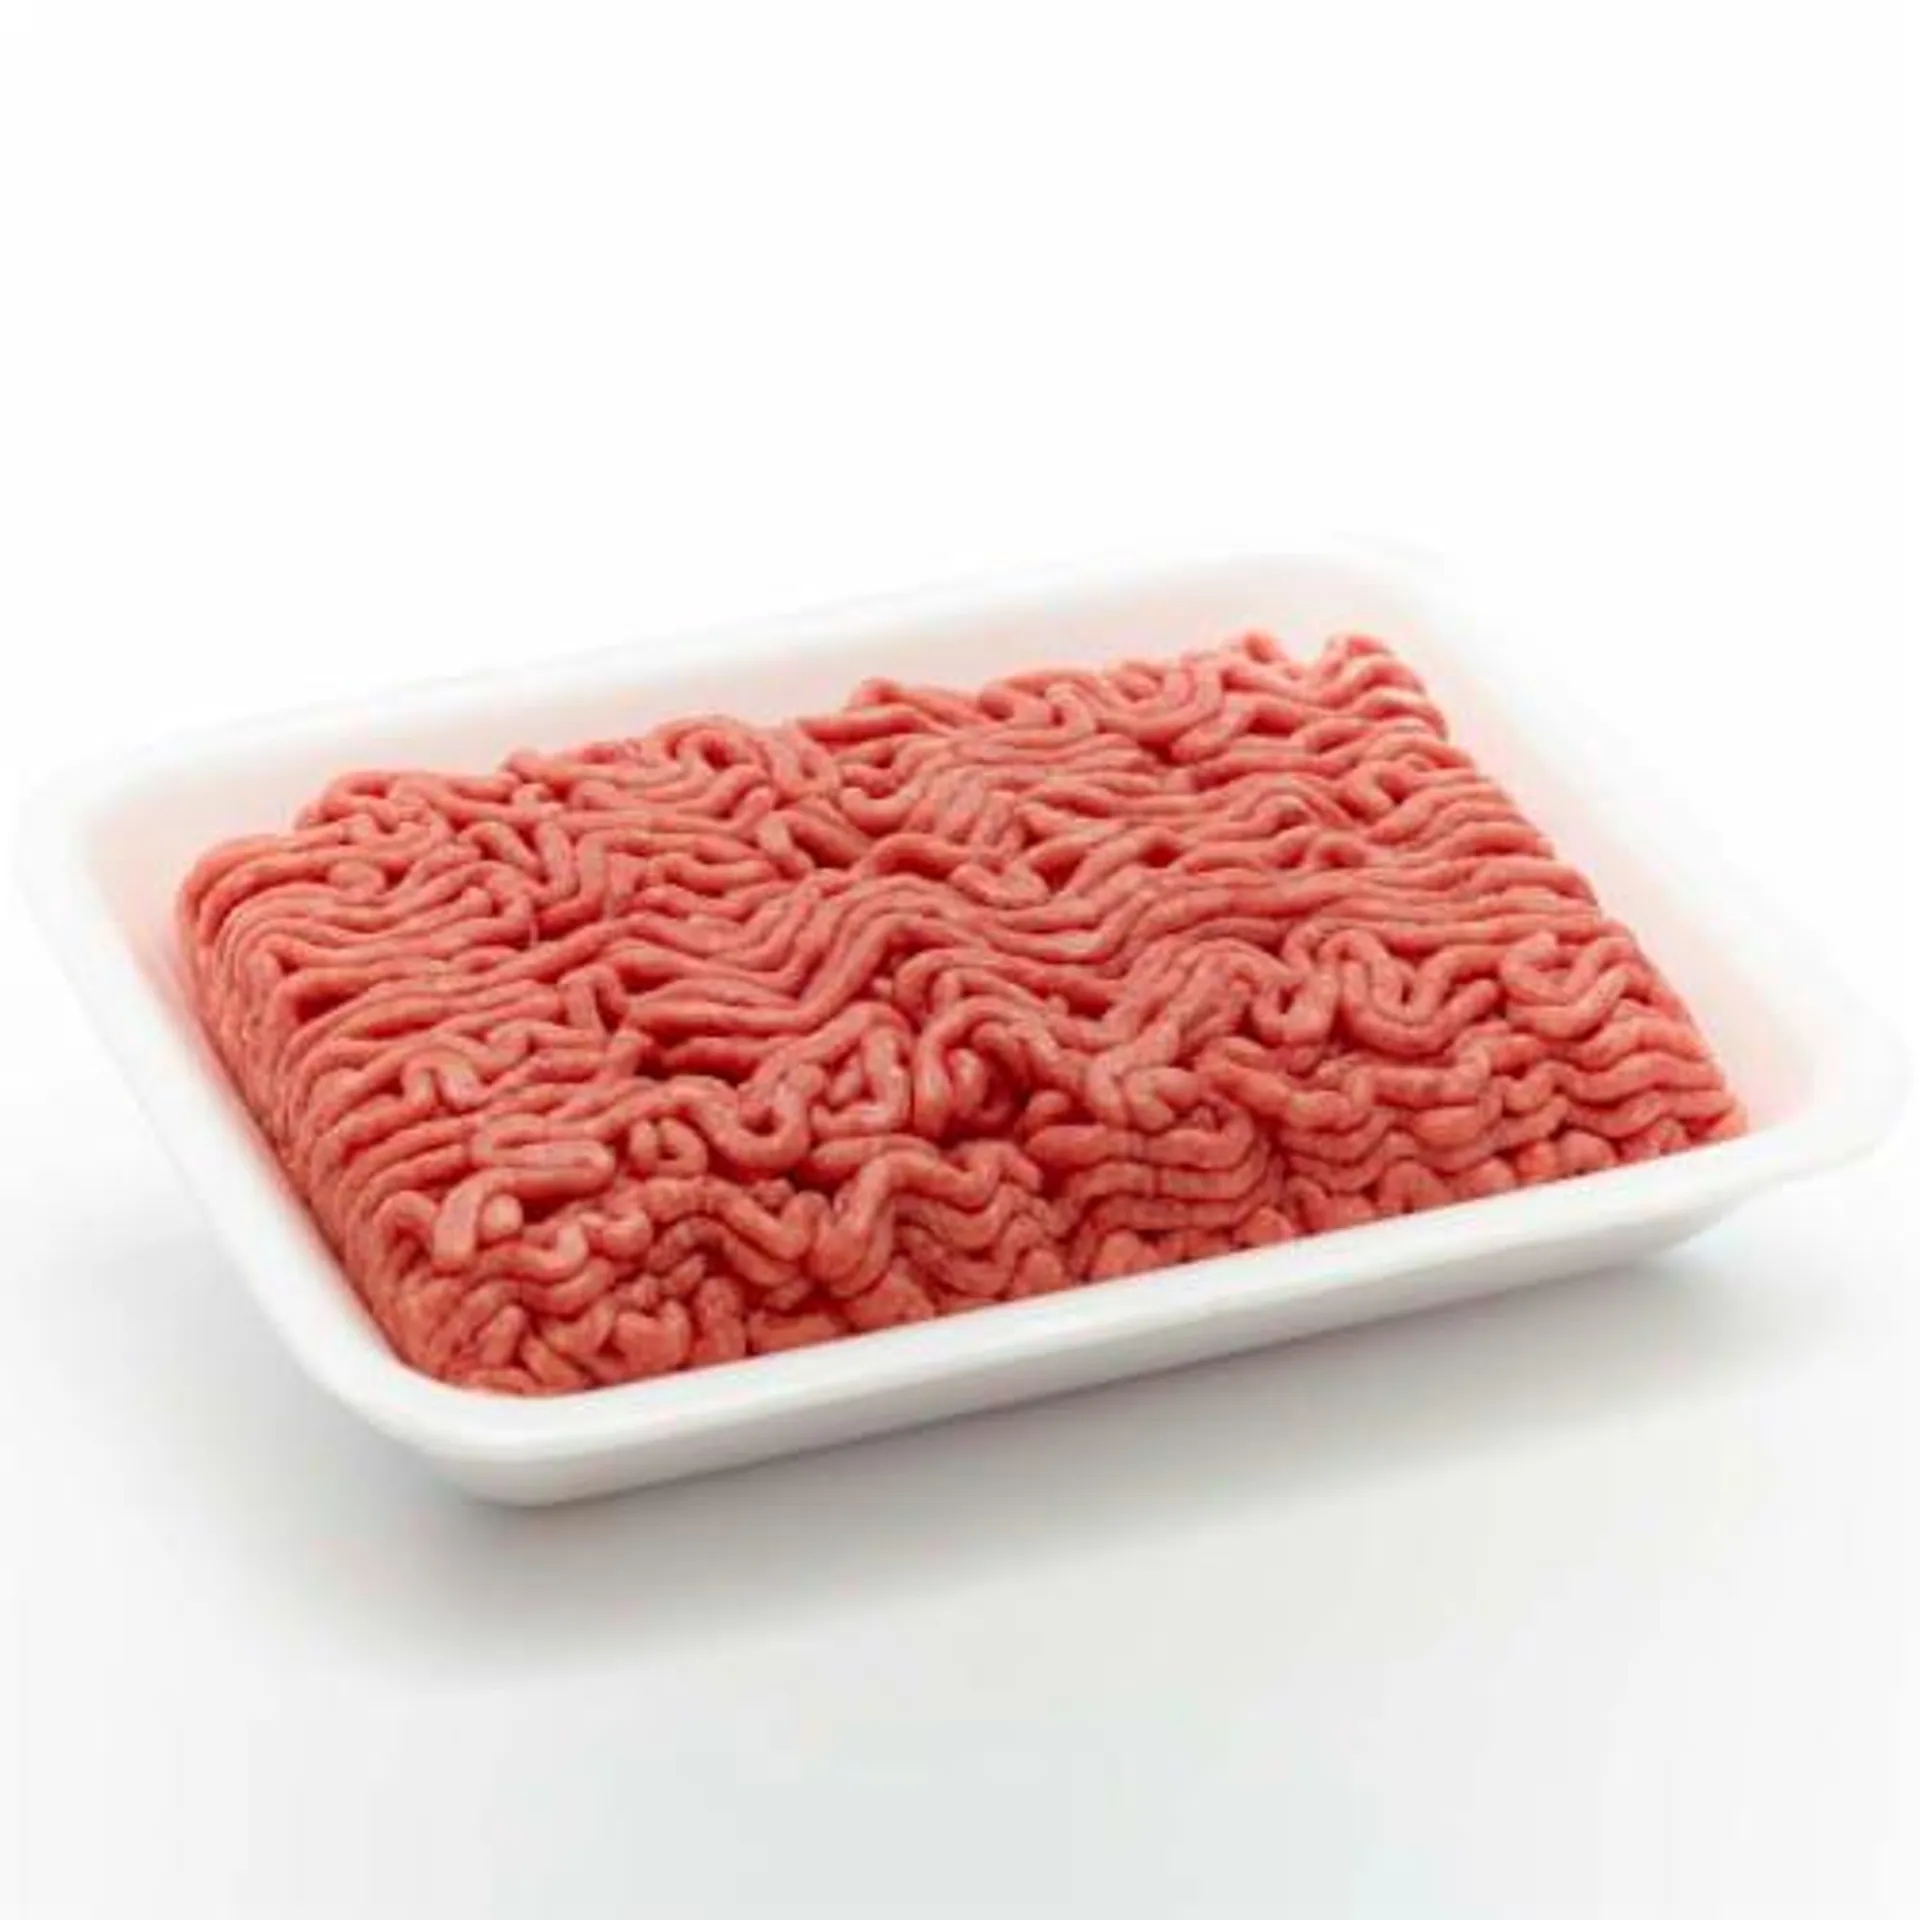 Private Selection™ 85/15 Lean Angus Ground Beef